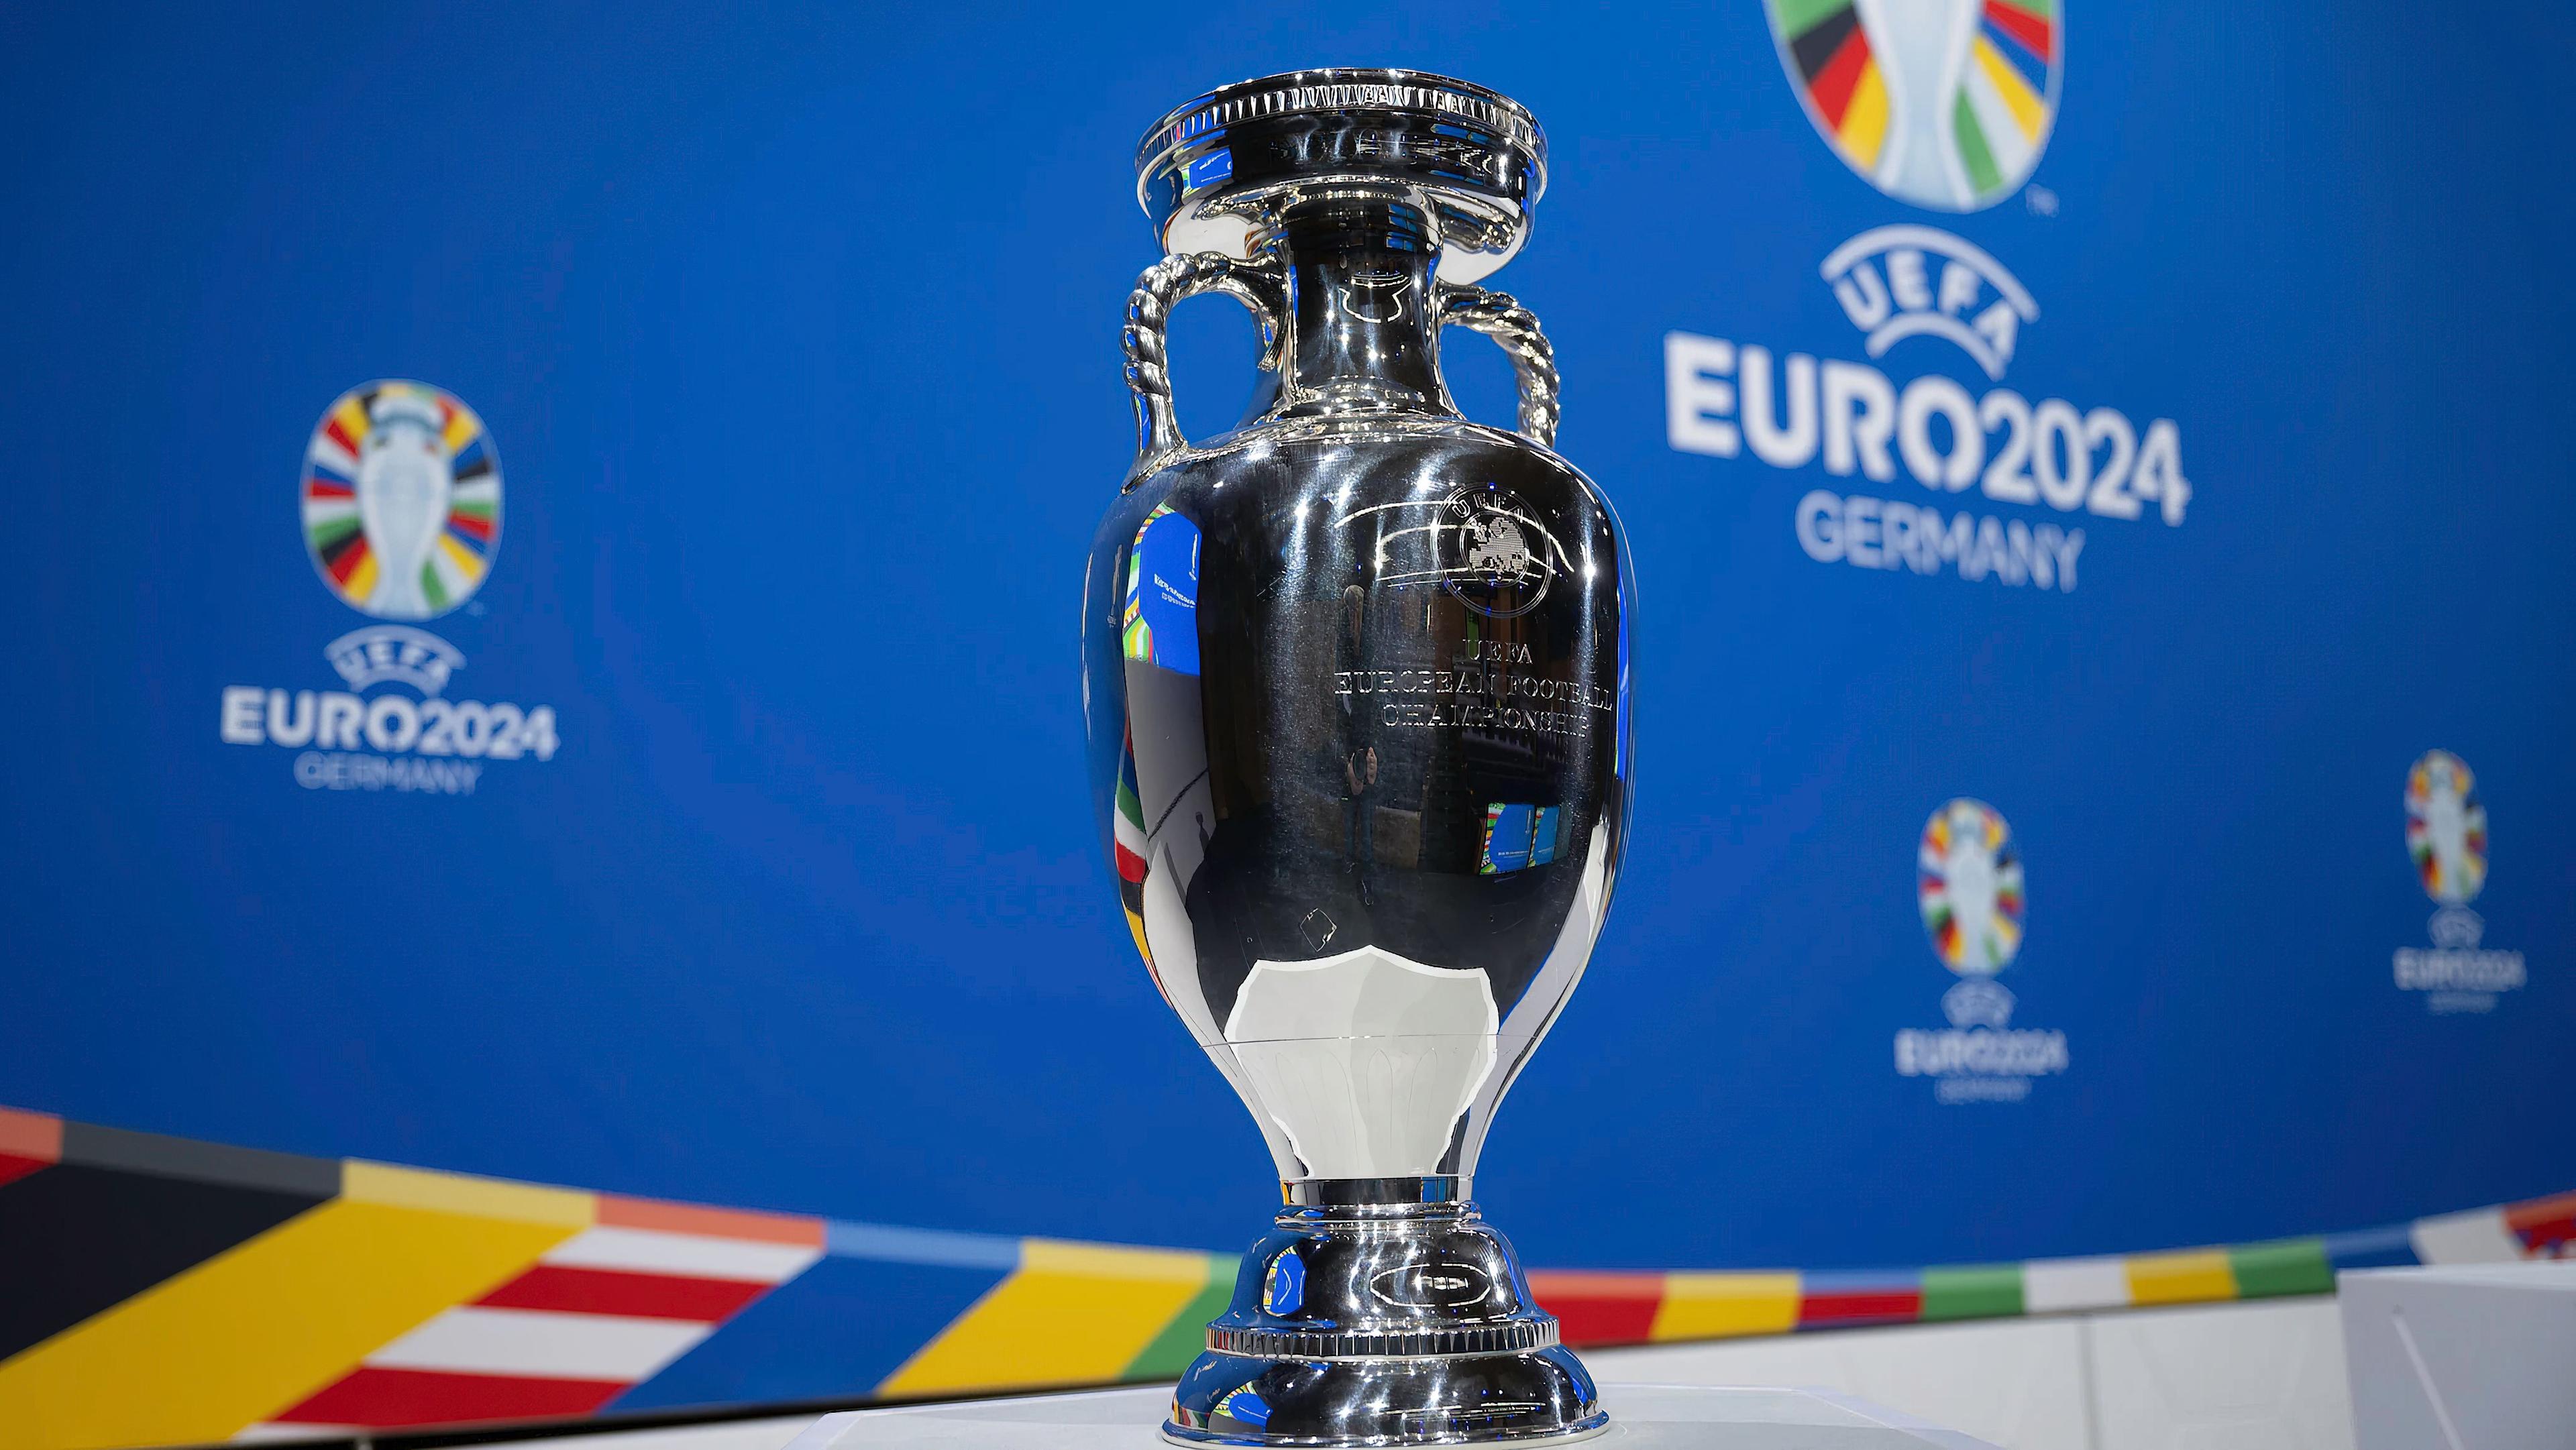 The European Football Championship kicks off today in Germany